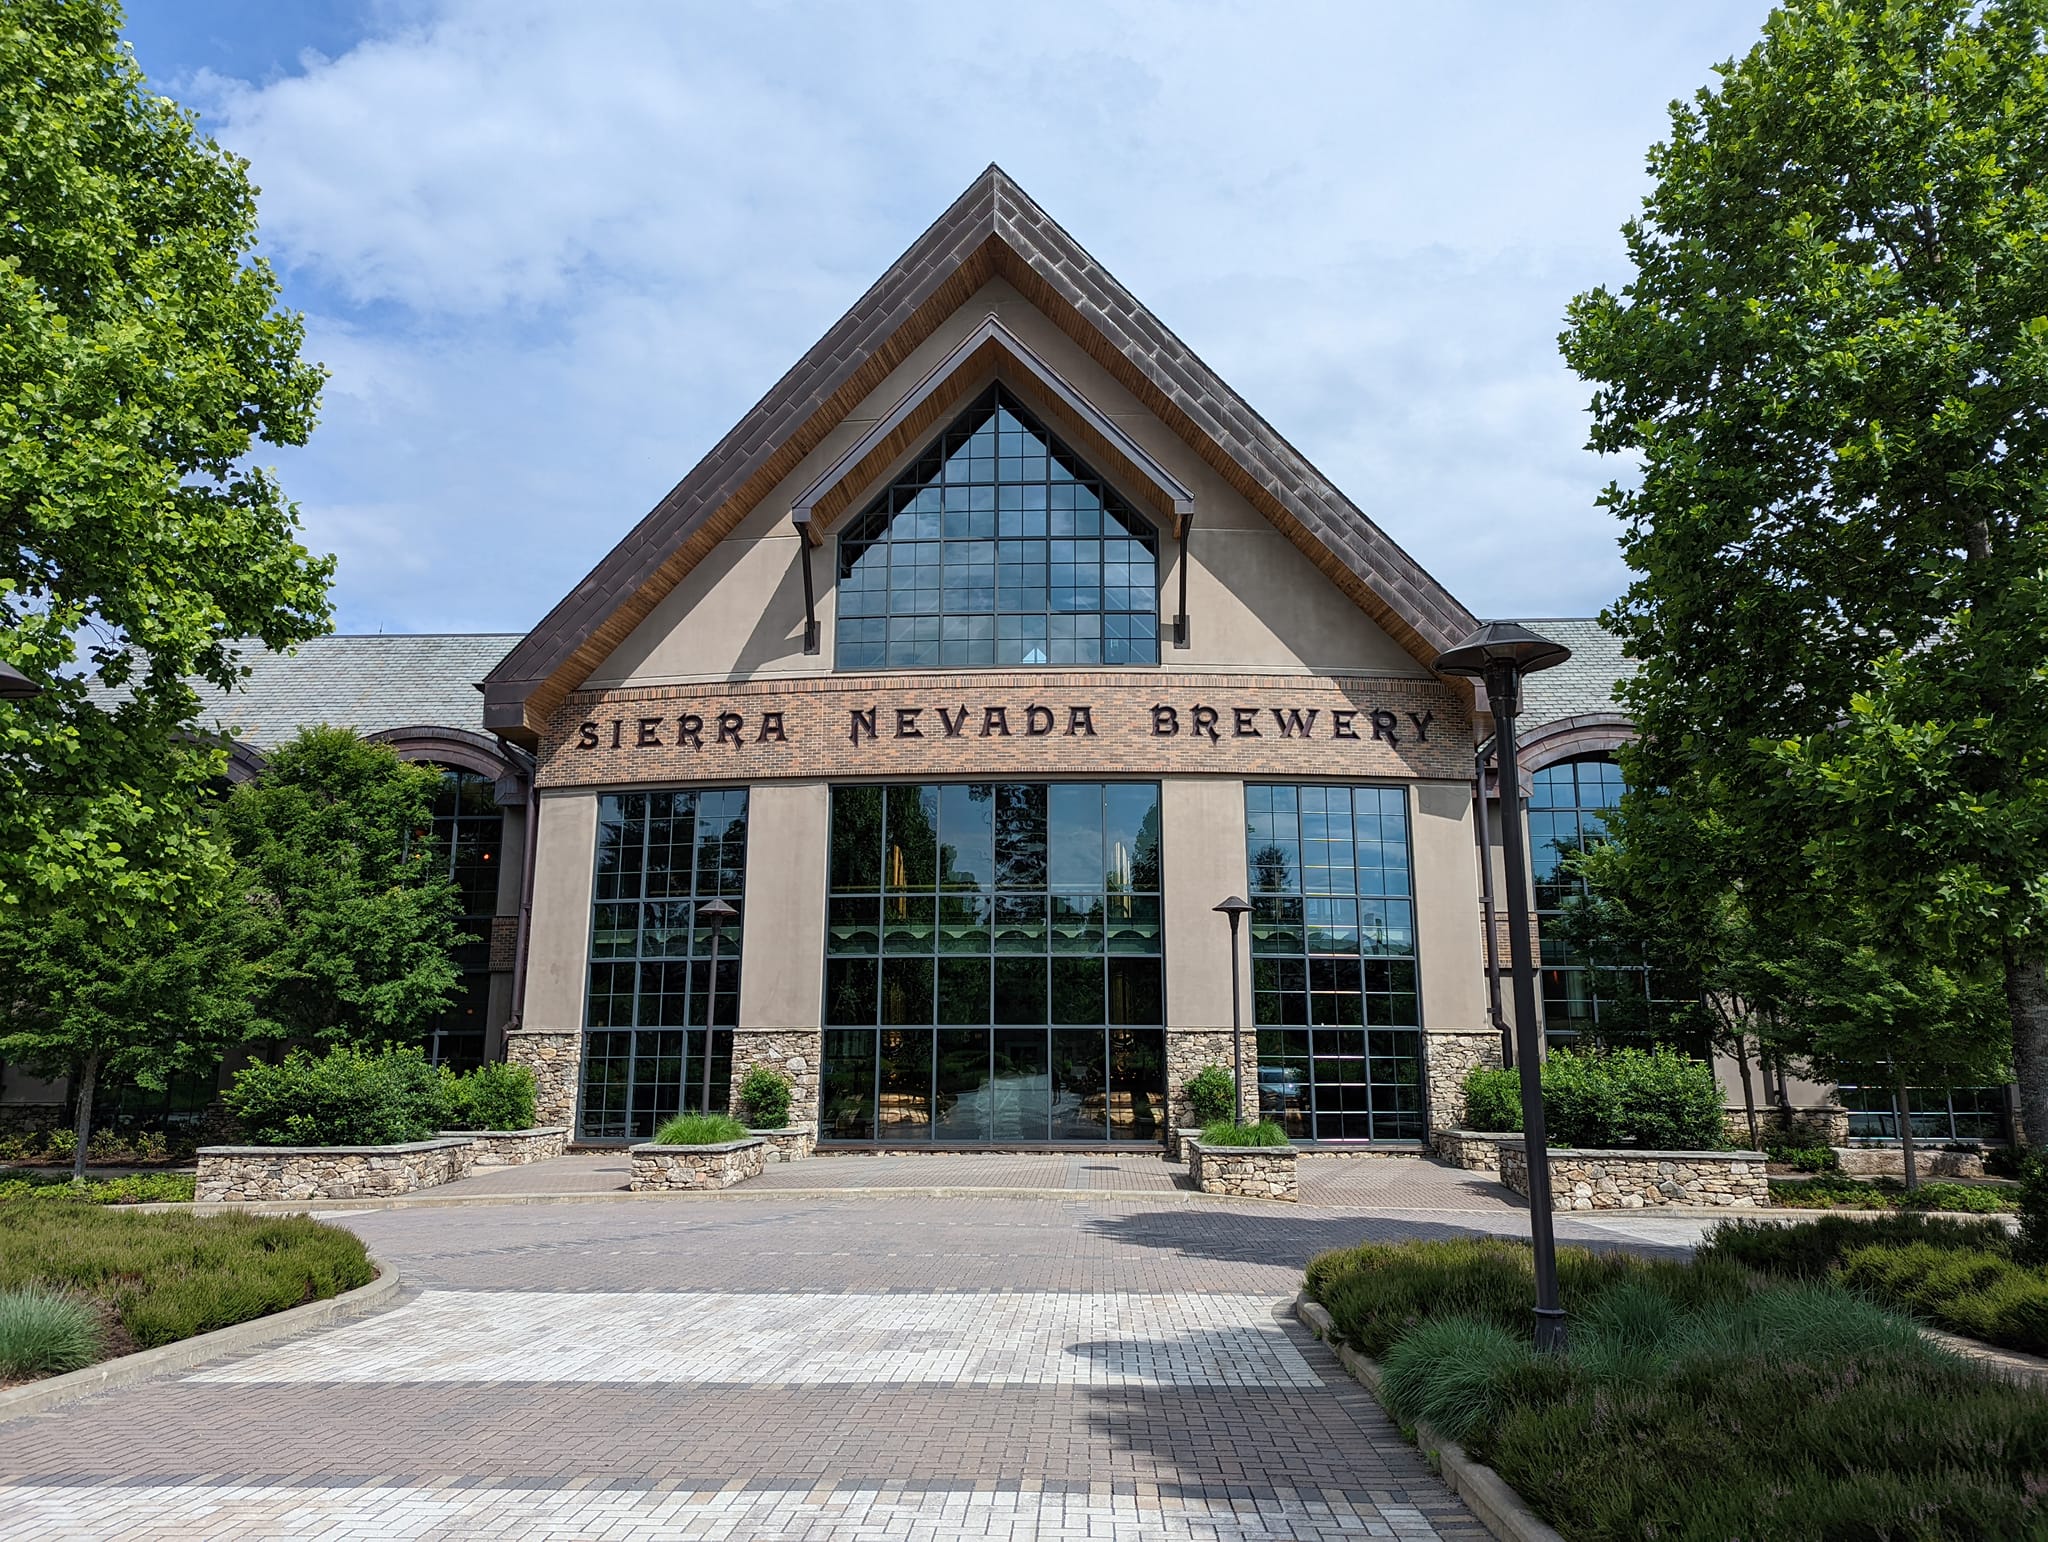 Sierra Nevada Brewing Co. To Be Recognized As North Carolina’s 1st BearWise Business – WCCB Charlotte’s CW